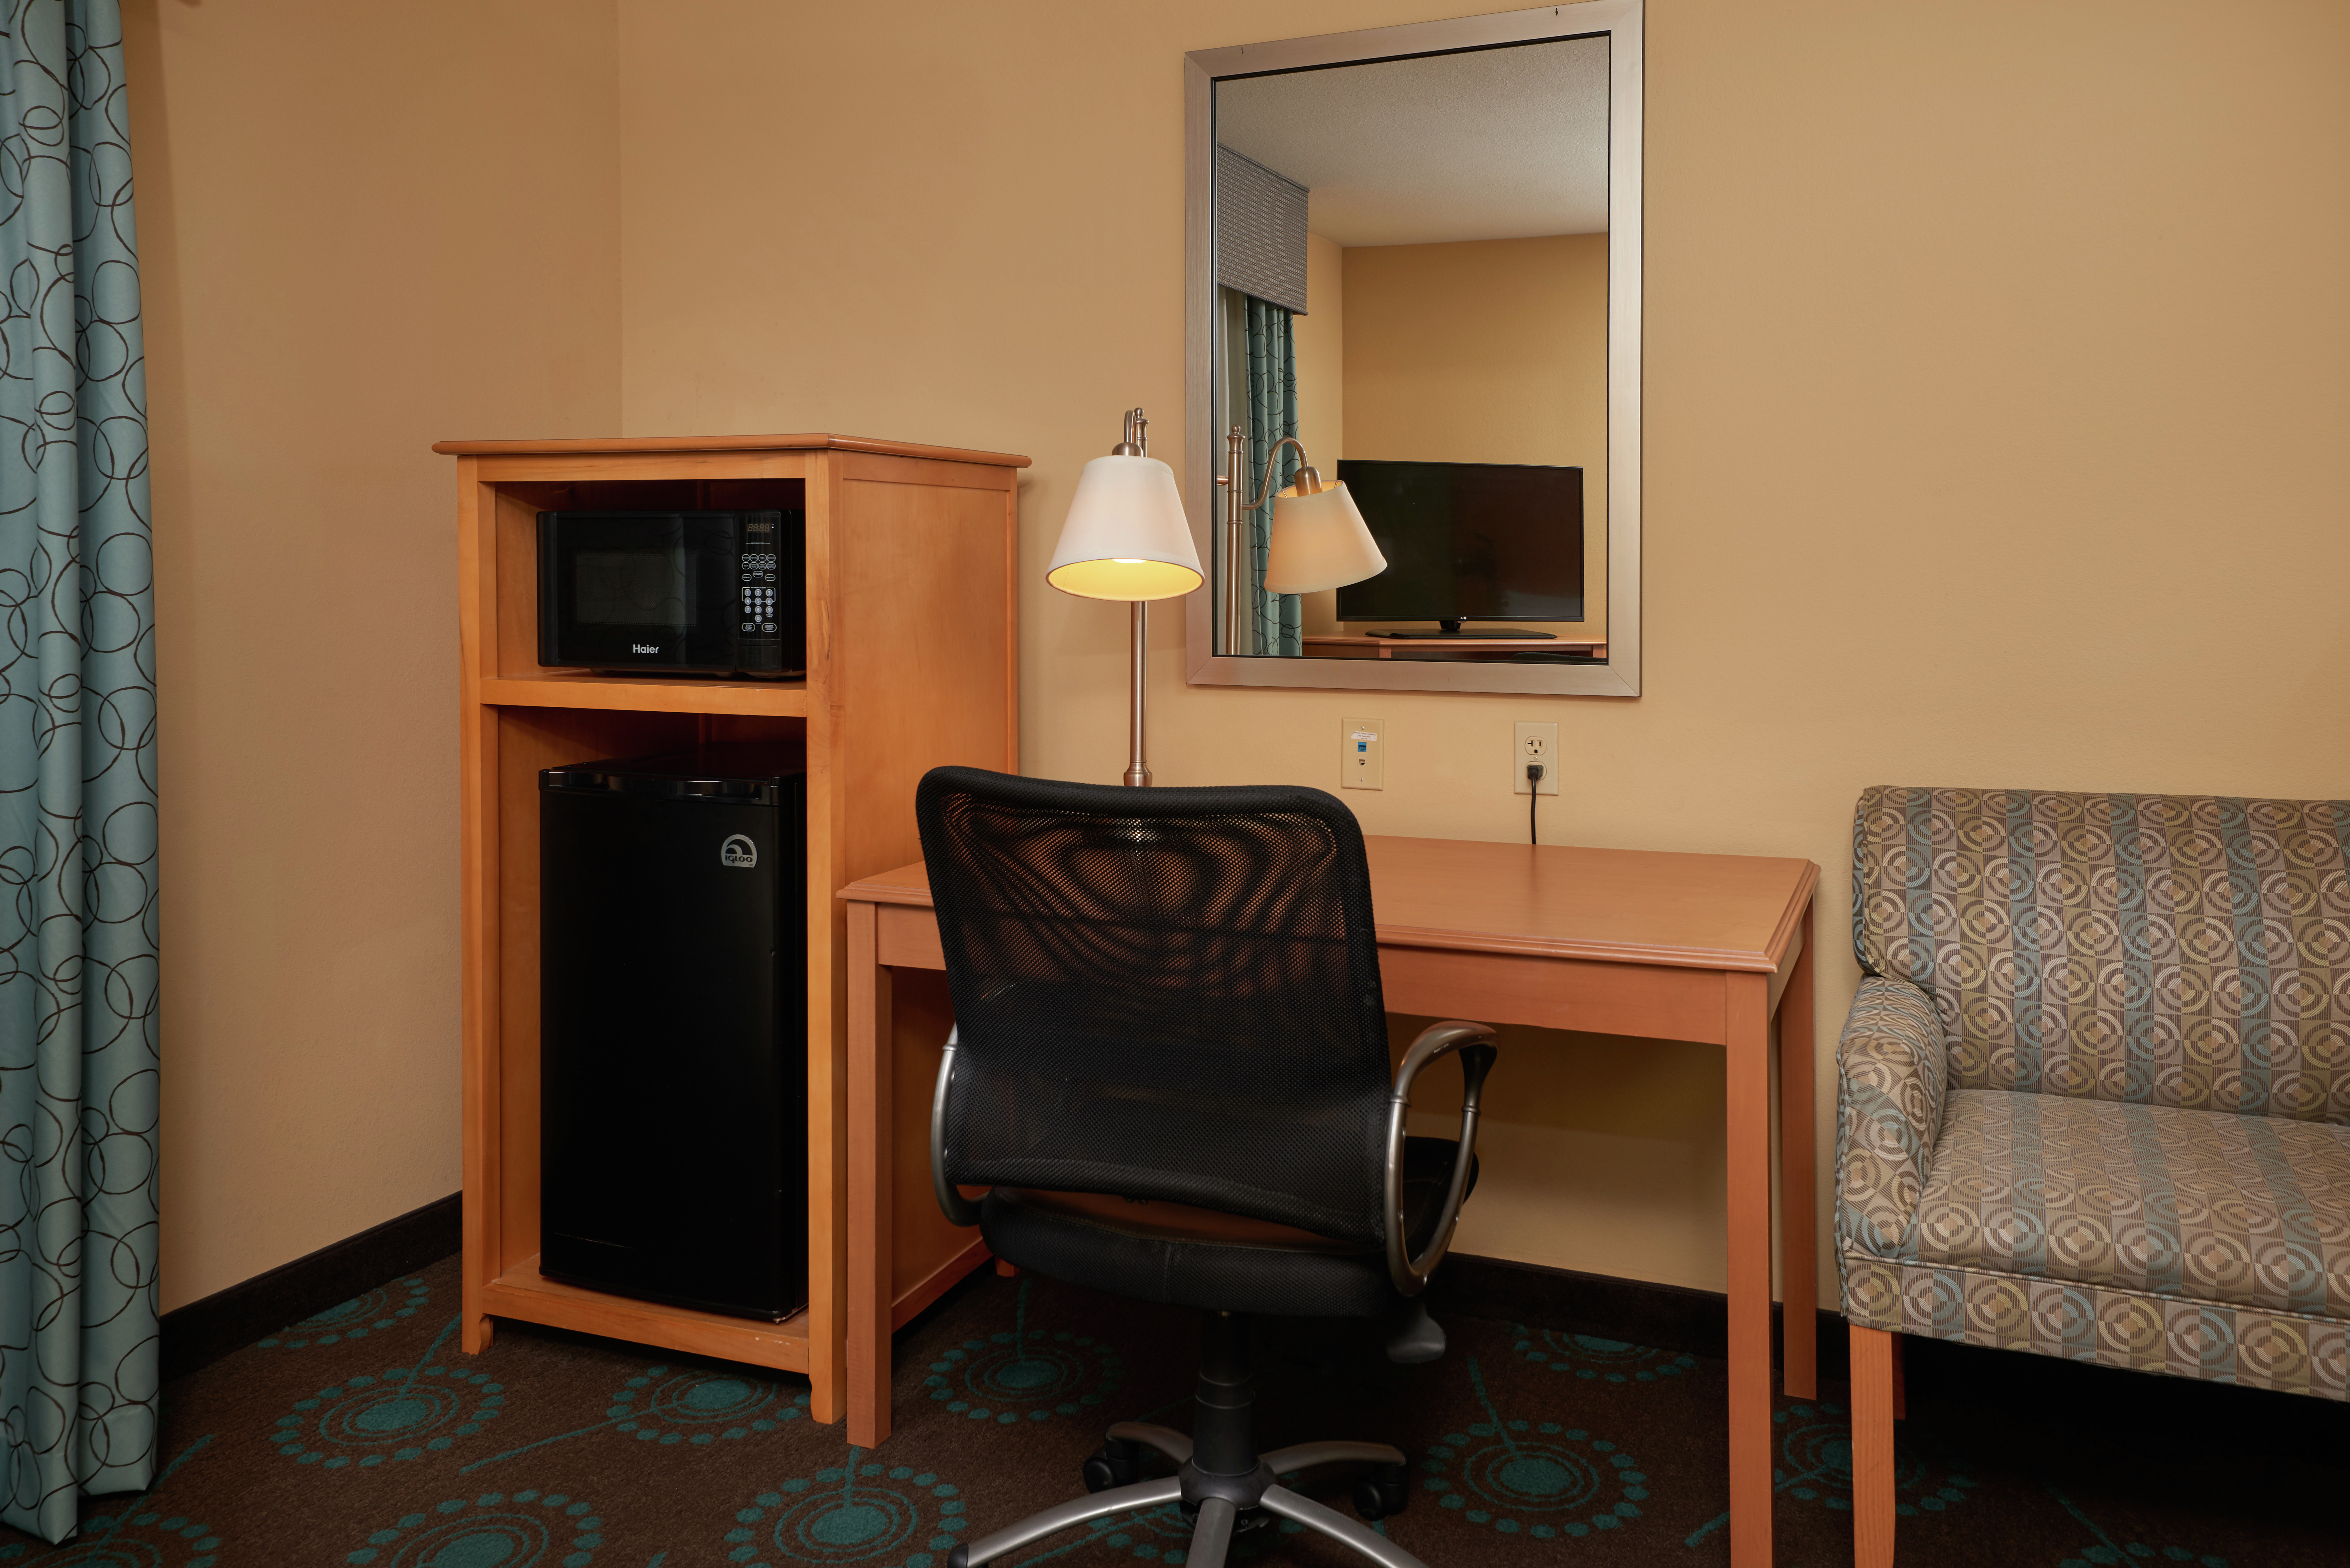 Room Amenities such as Microwave Minifridge Work Desk Chair and Mirror